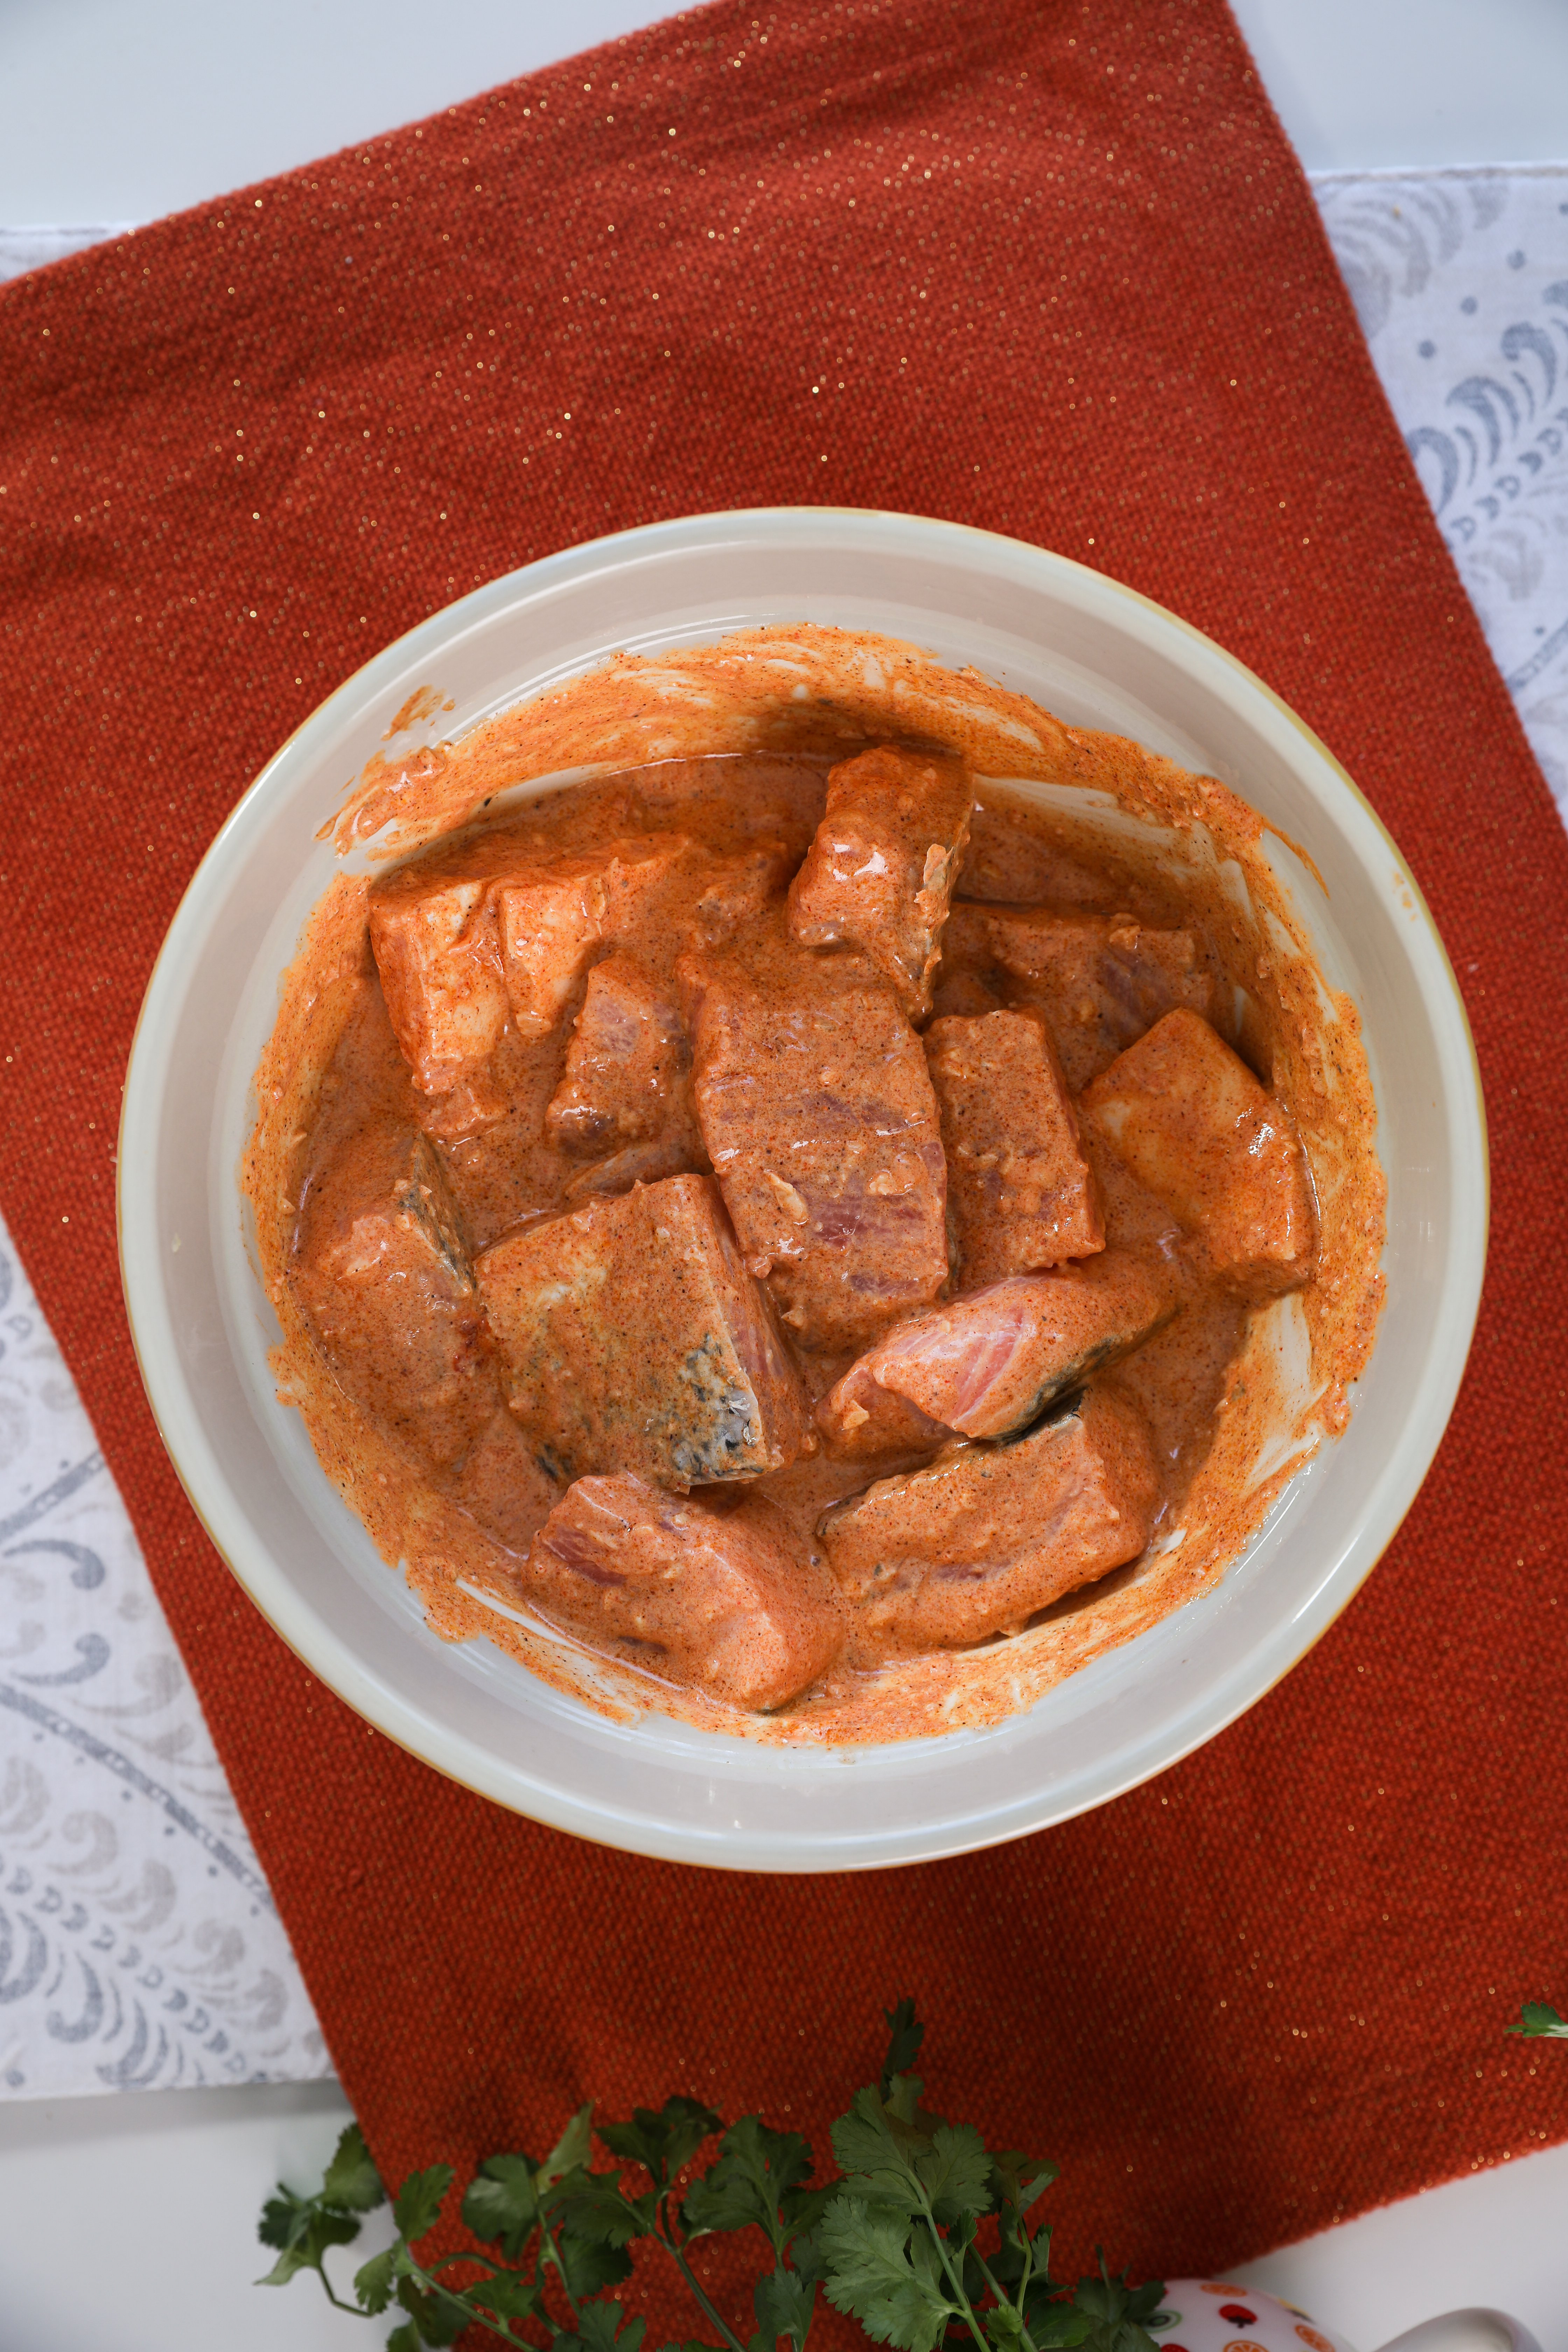 A bowl containing marinated salmon pieces sits on an orange mat.